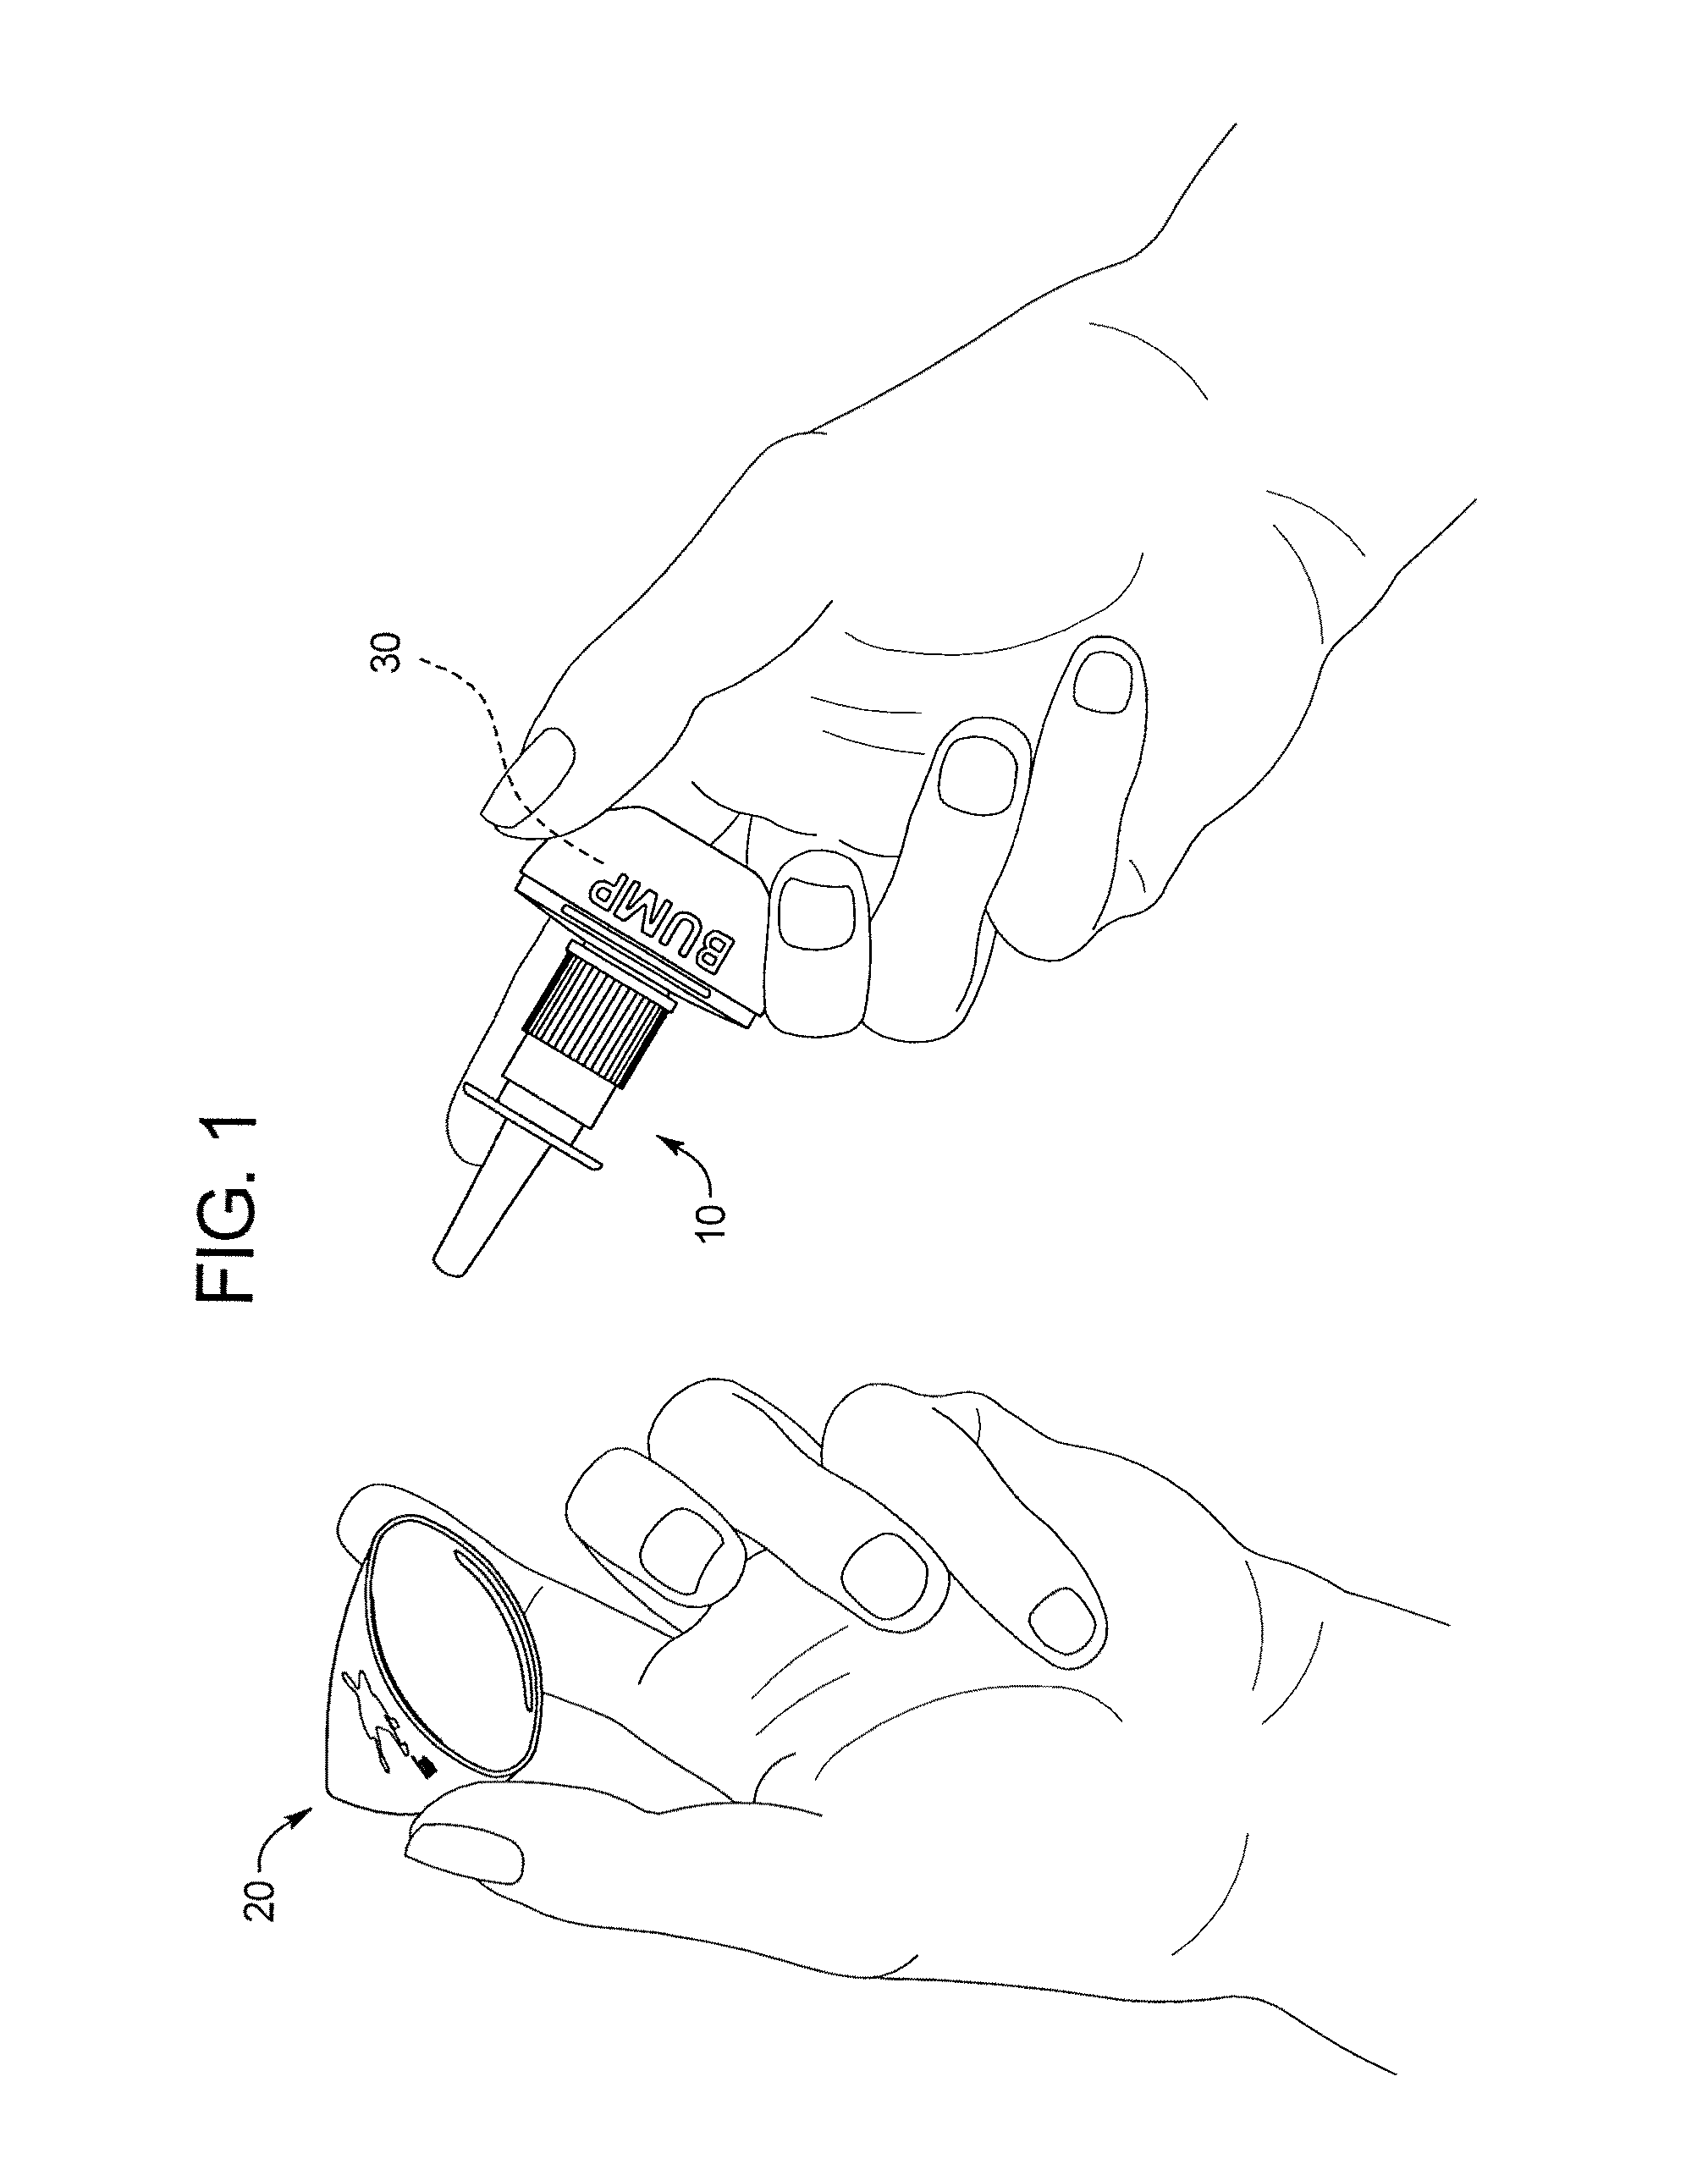 Sprayable oxygenated saline composition and method for treating nasal congestion, allergy, dryness, eye irritation, throat irritation, wounds, and skin as applied to human tissues